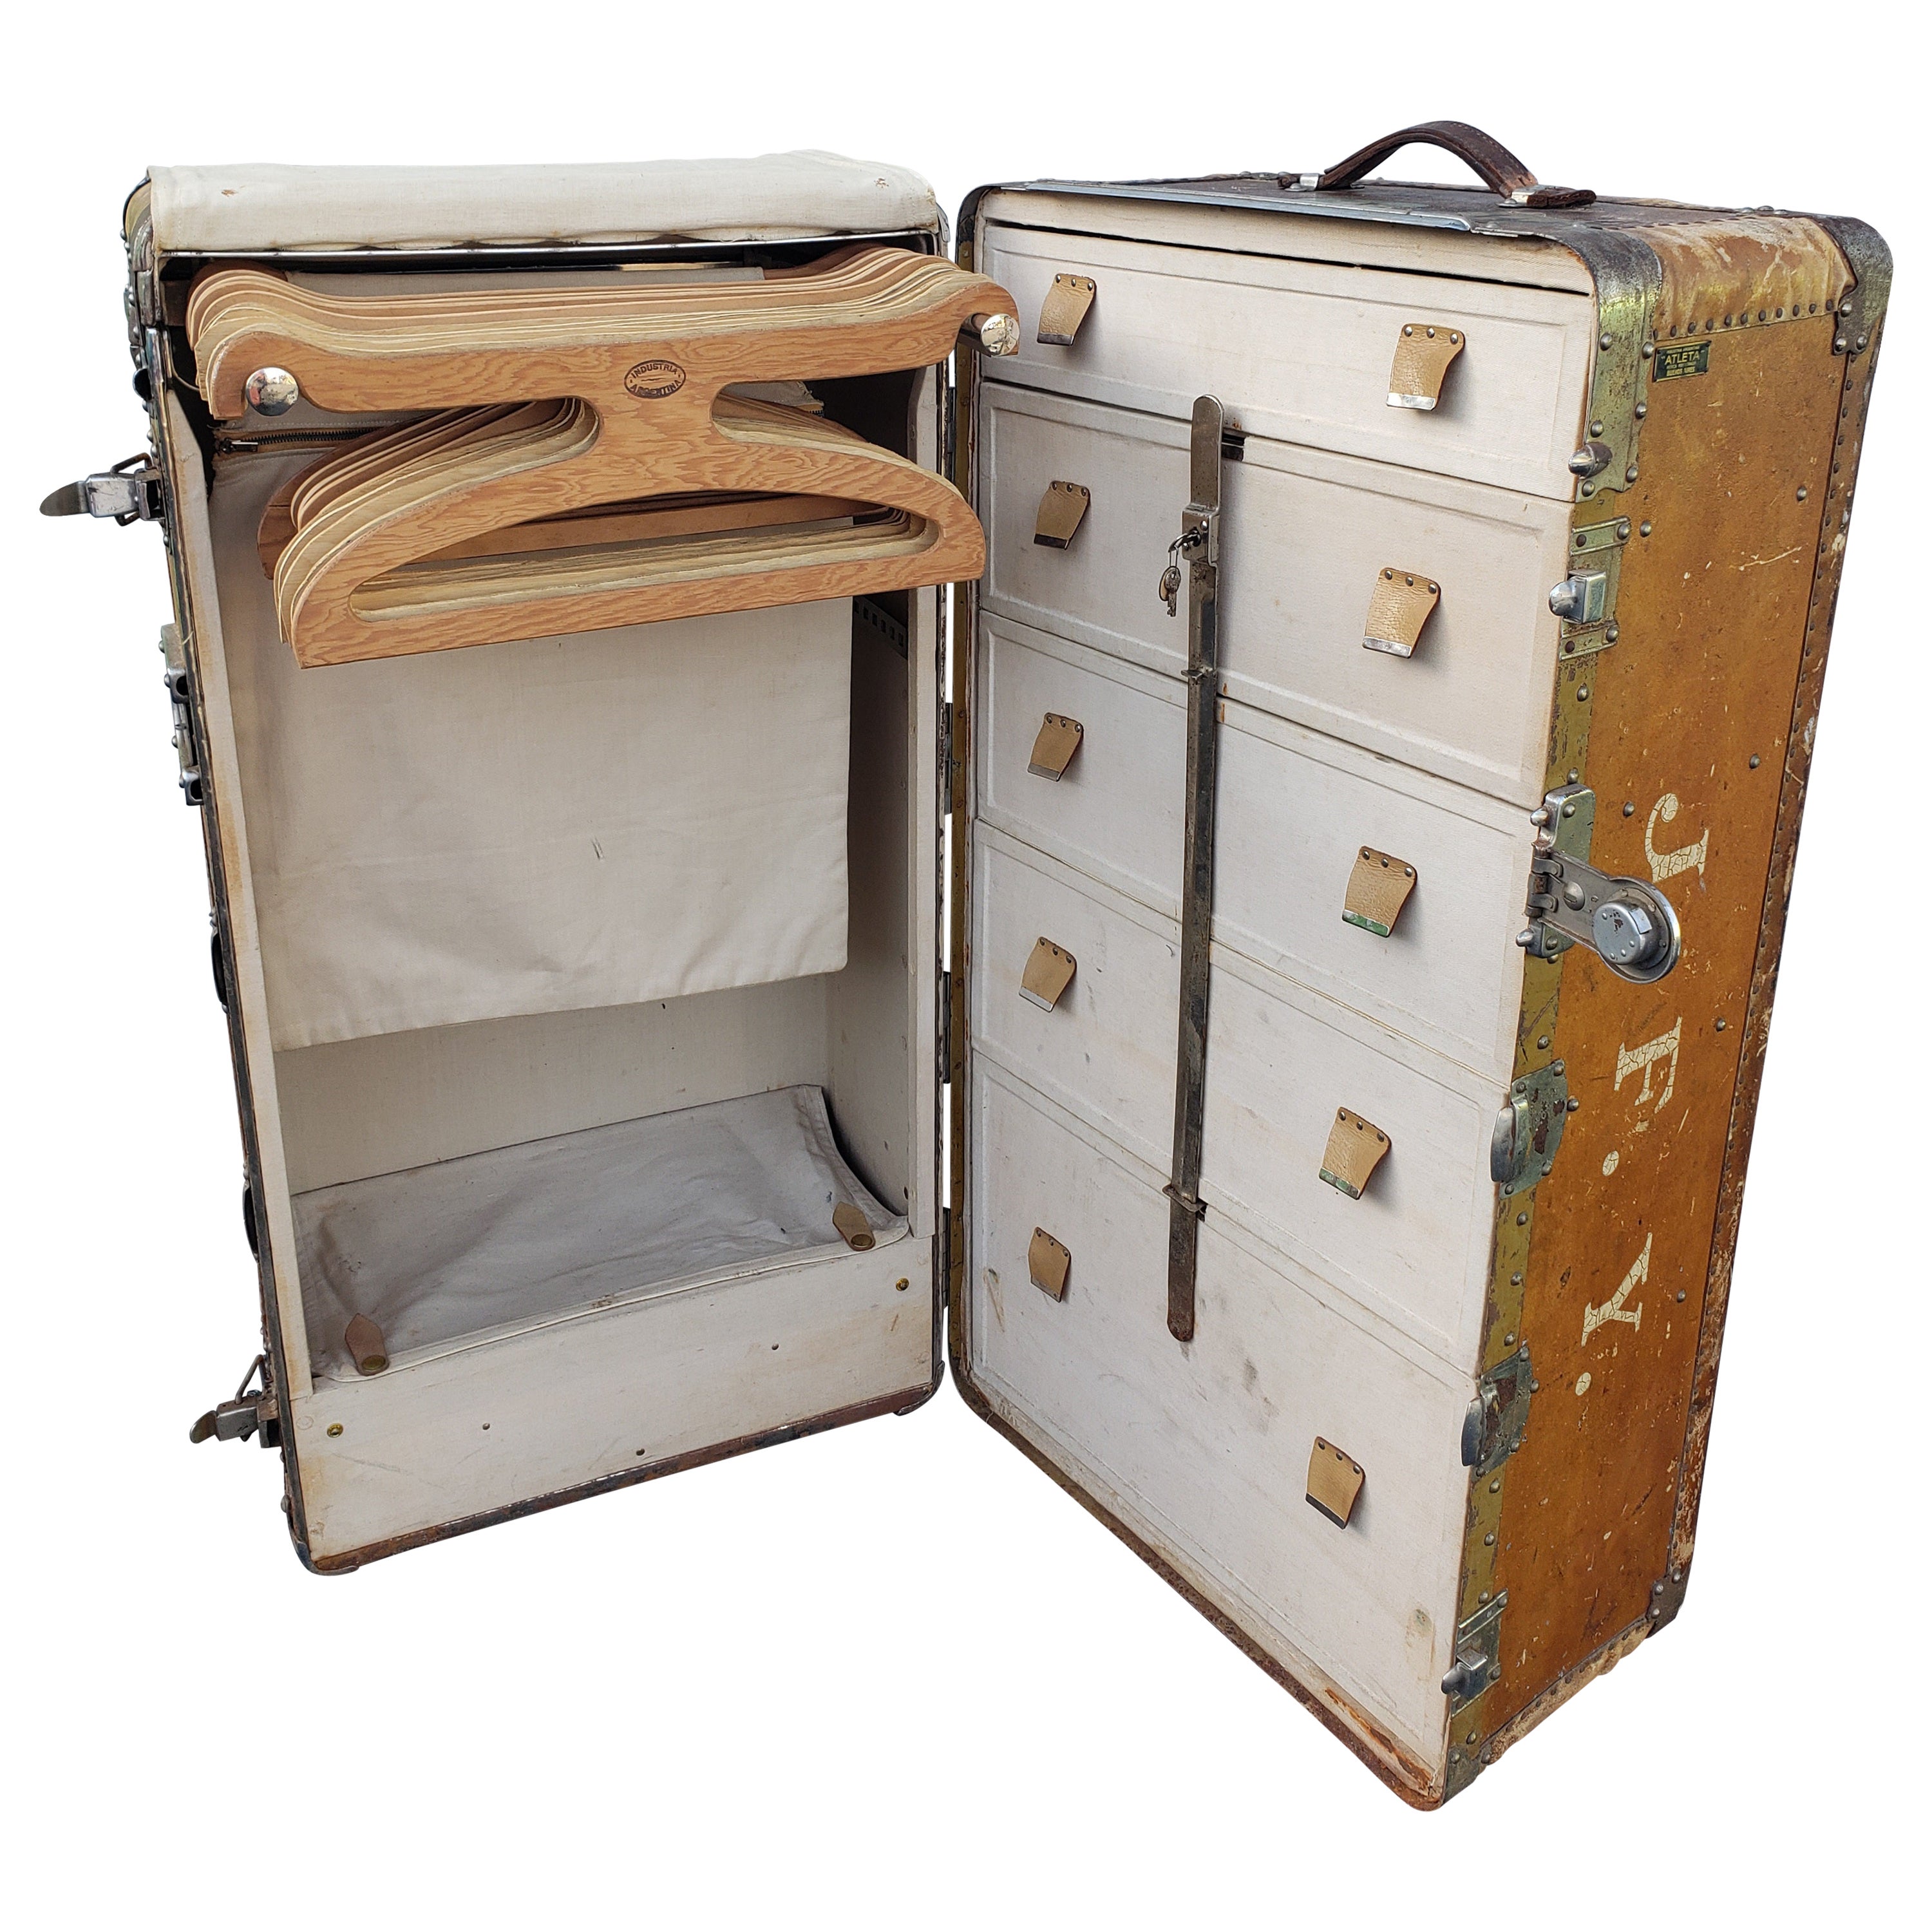 What do you line a steamer trunk with?